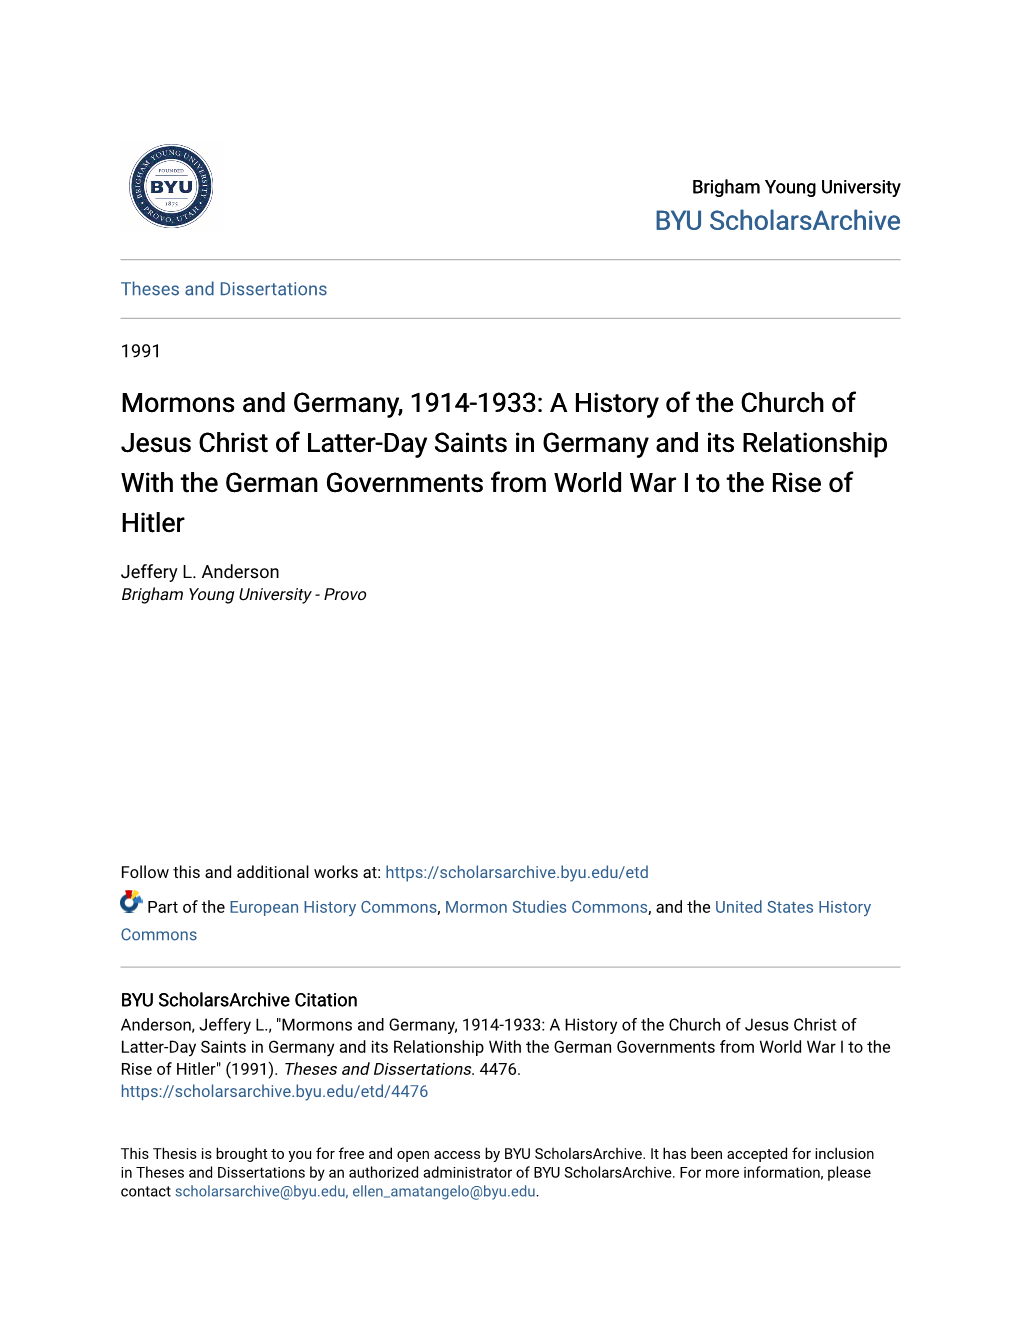 Mormons and Germany, 1914-1933